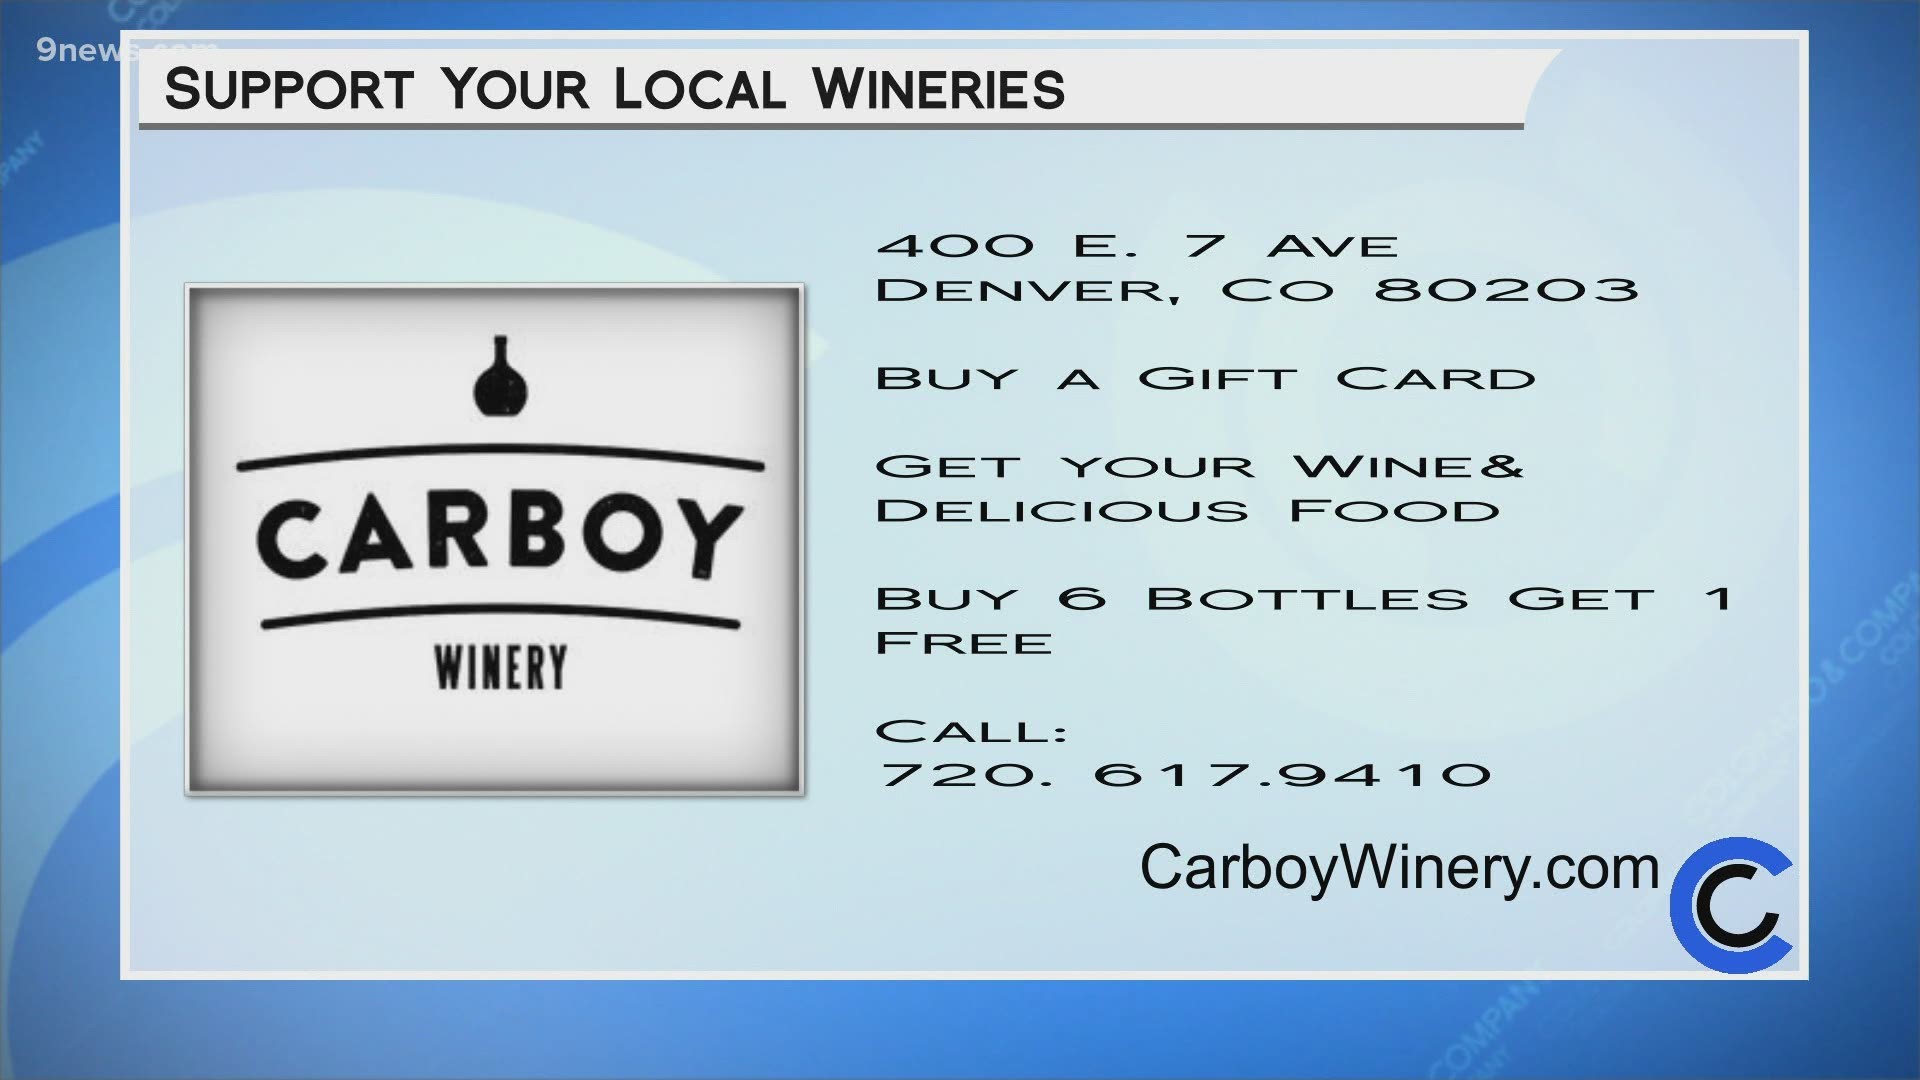 Get a Charcuterie Board and a bottle of House Red or House White for just $30! Check out their menu at CarboyWinery.com.